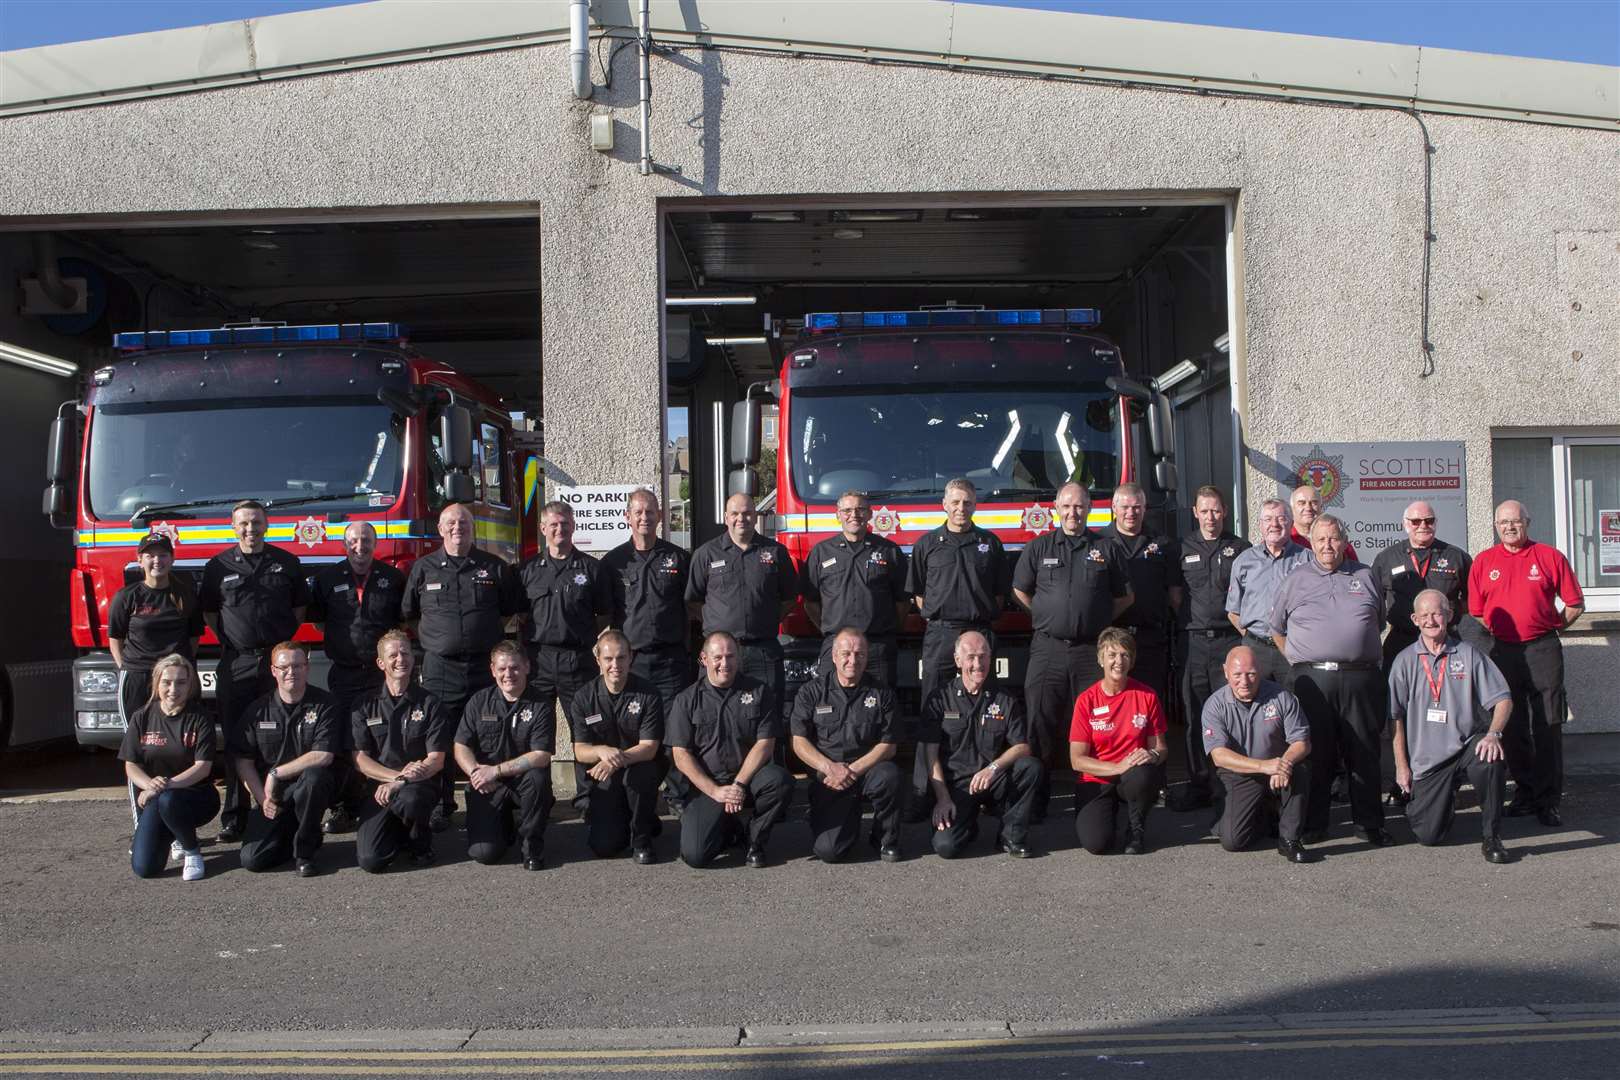 At the end of the Wick fire station open day, the Wick firefighters pose for a group photograph along with some of their other fire service colleagues and others who helped make day a success. Picture: Robert MacDonald / Northern Studios